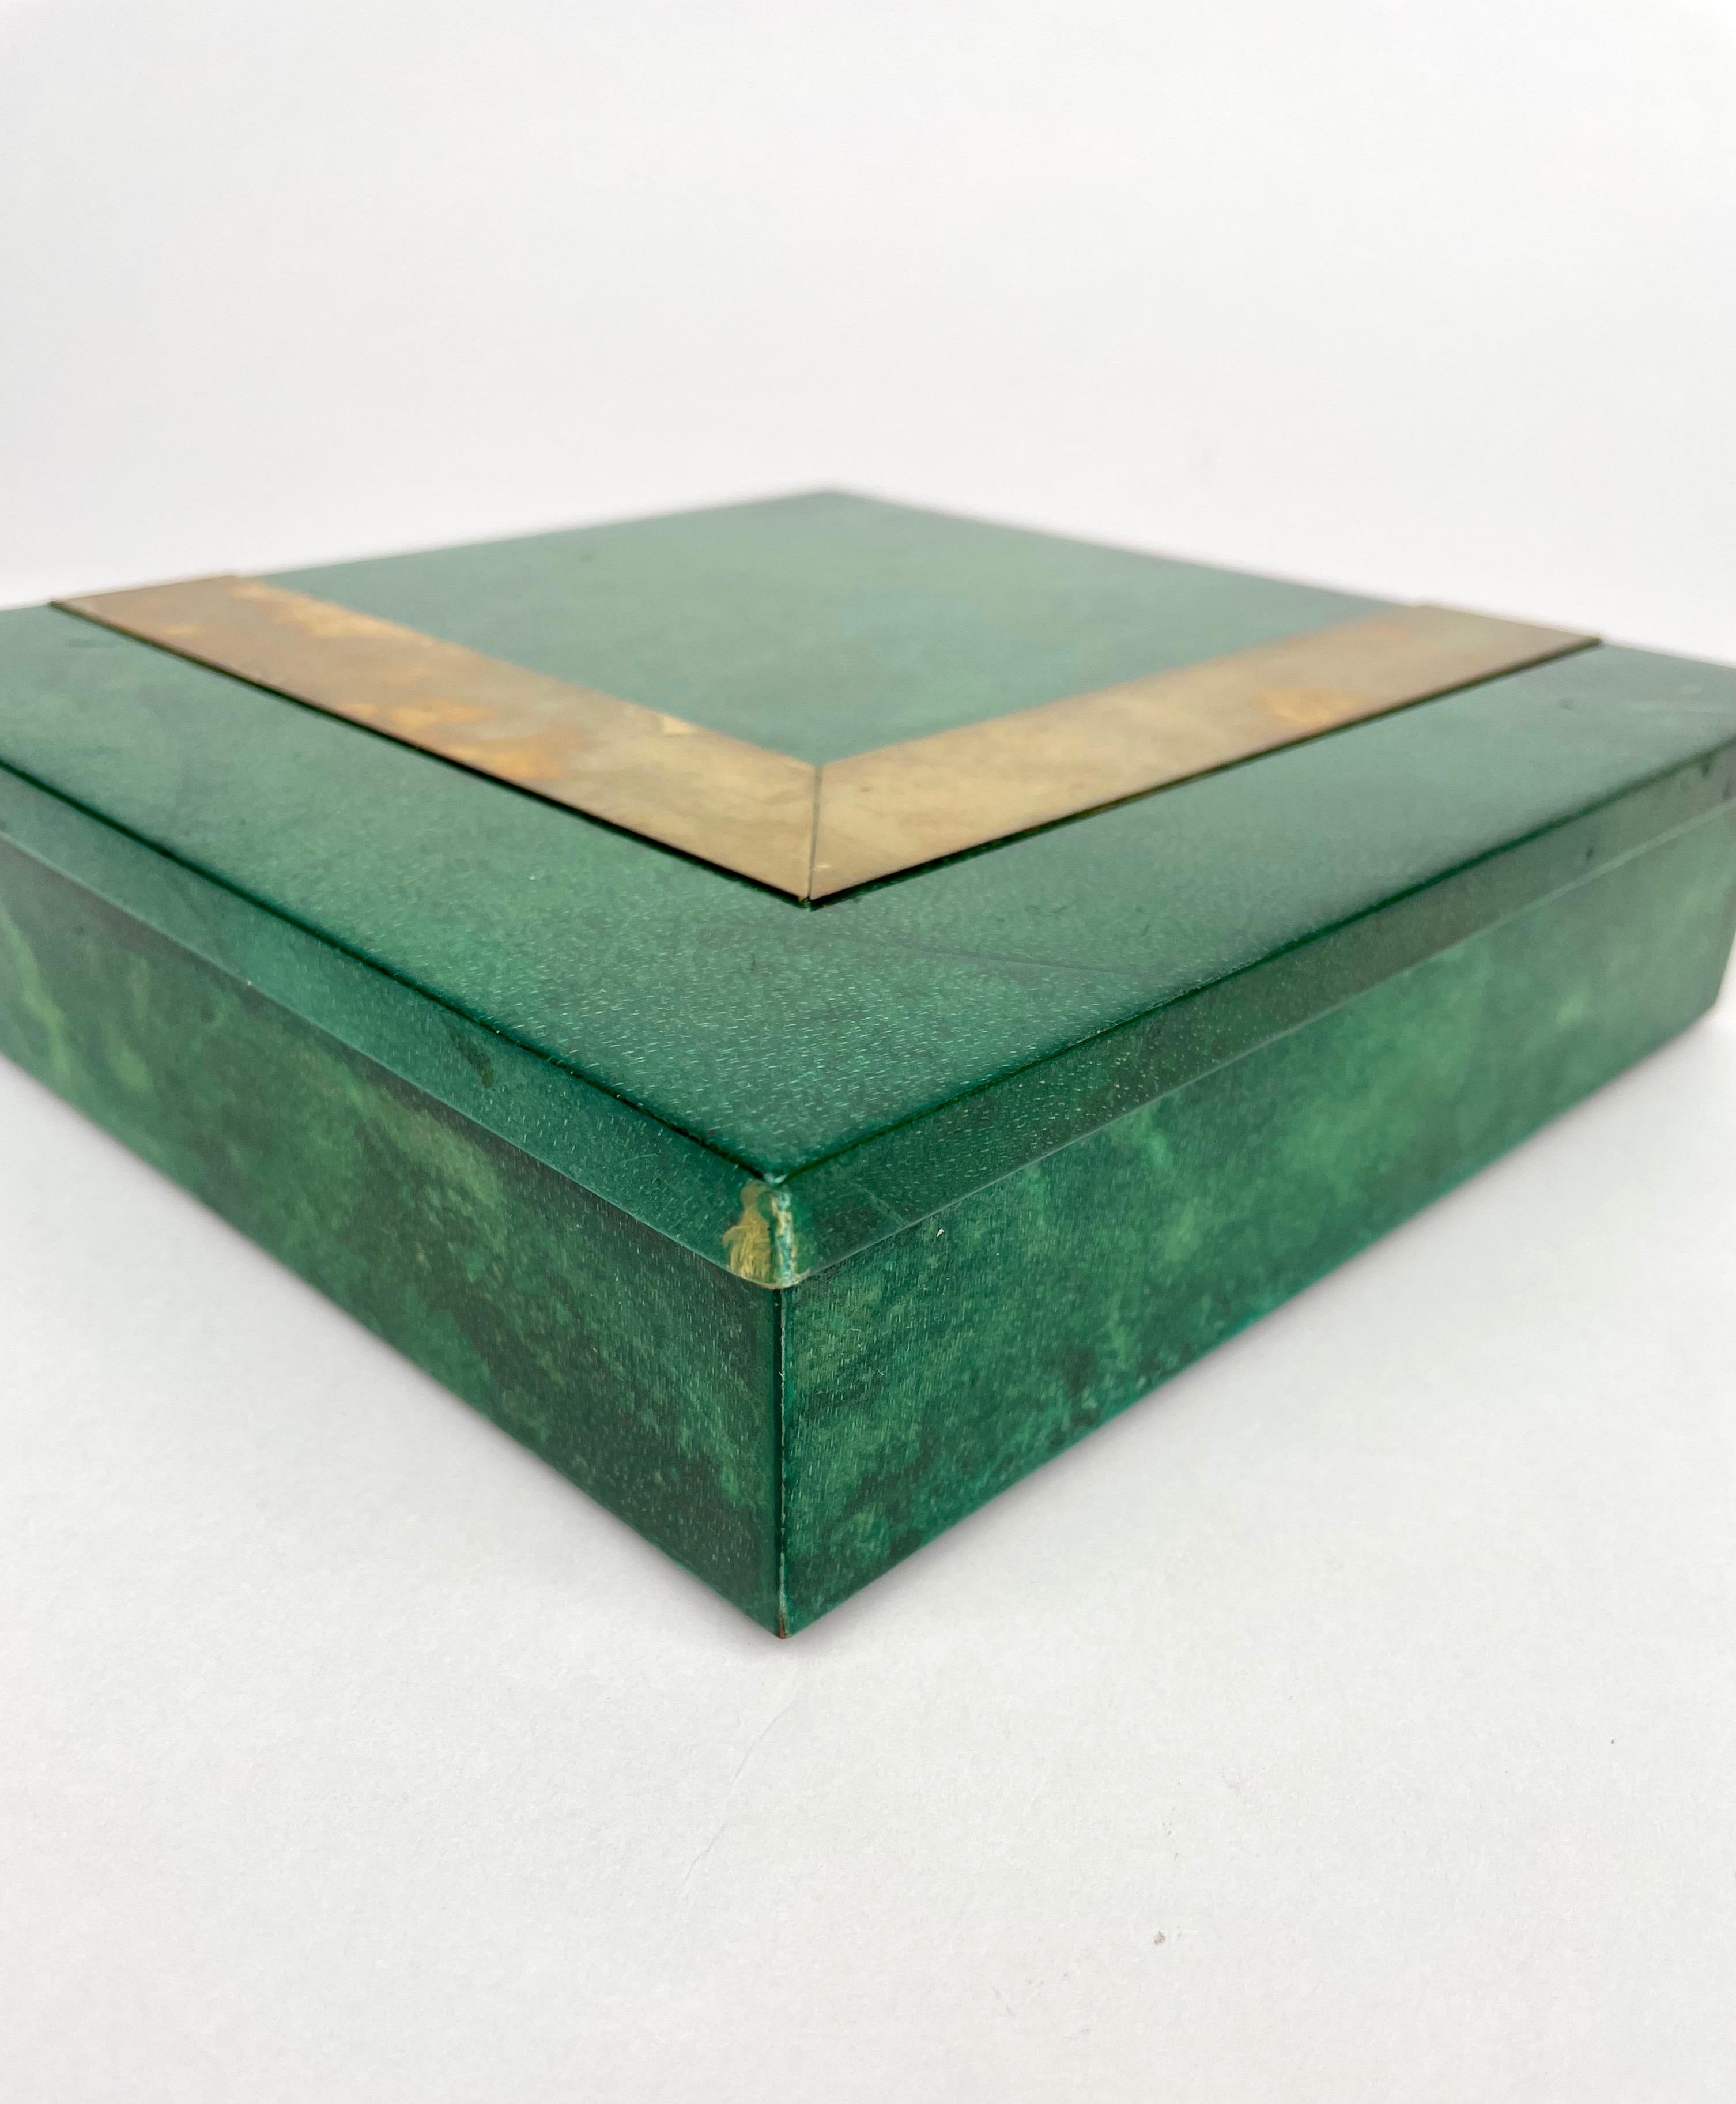 Squared Box in Green Goatskin and Brass Attributed to Aldo Tura, Italy, 1960s For Sale 5